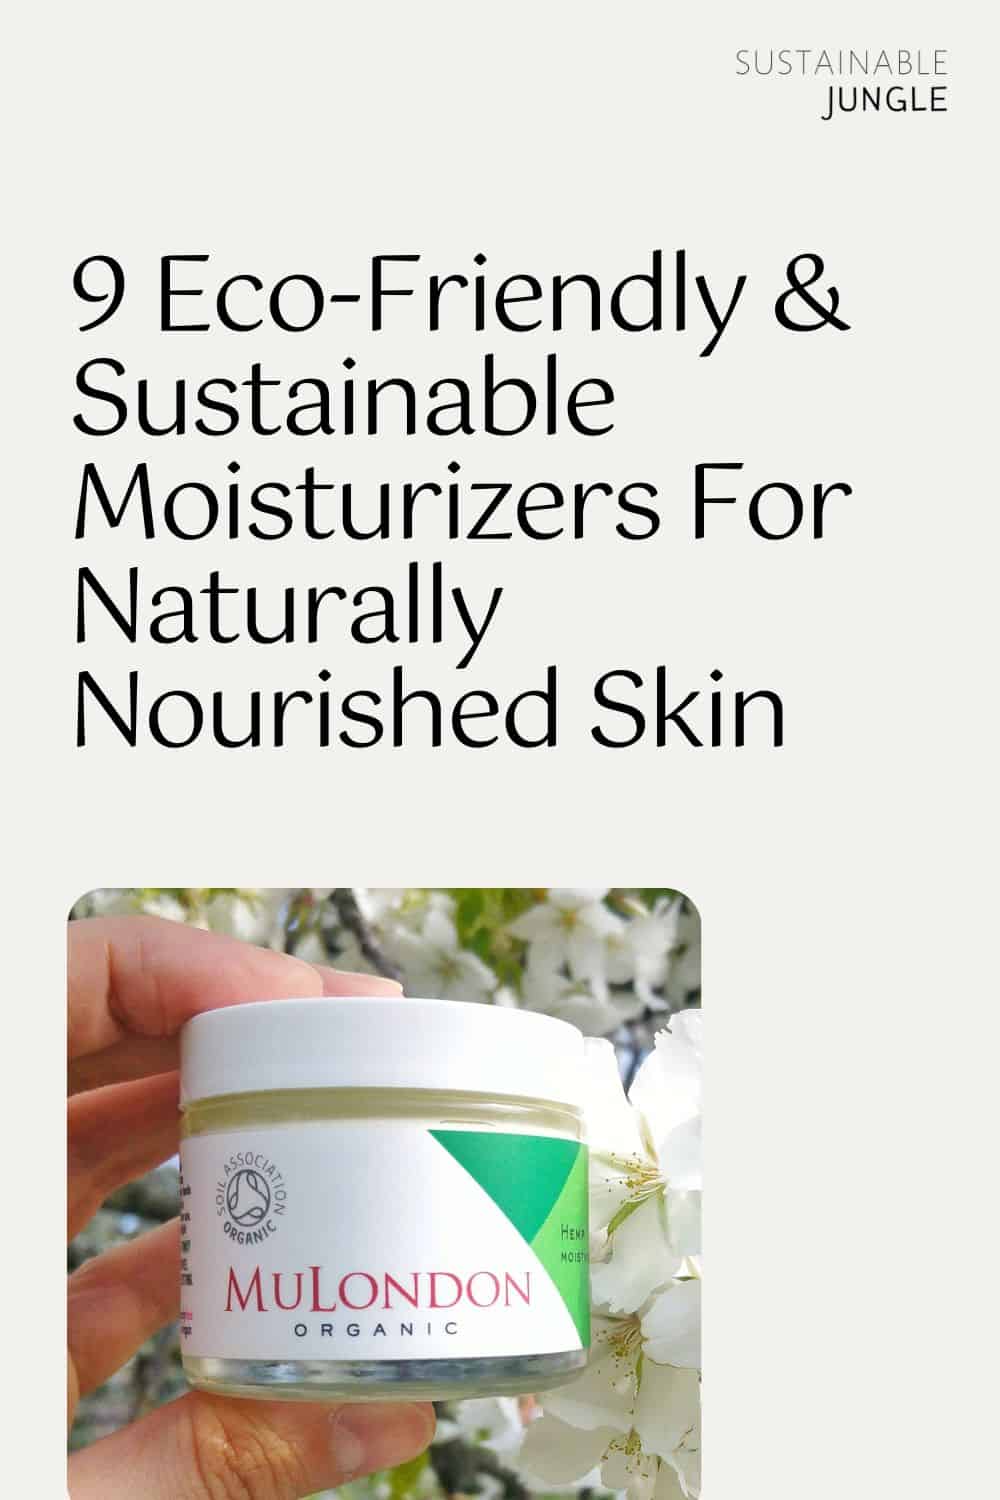 9 Eco-Friendly & Sustainable Moisturizers For Naturally Nourished Skin Image by MuLondon #sustainablemoisturizer #bestsustainablefacemoisturizer #sustainabletintedmoisturizer #ecofriendlymoisturizer #ecofriendlyfacemoisturizer #ecofriendlyfacemoisturizerwithspf